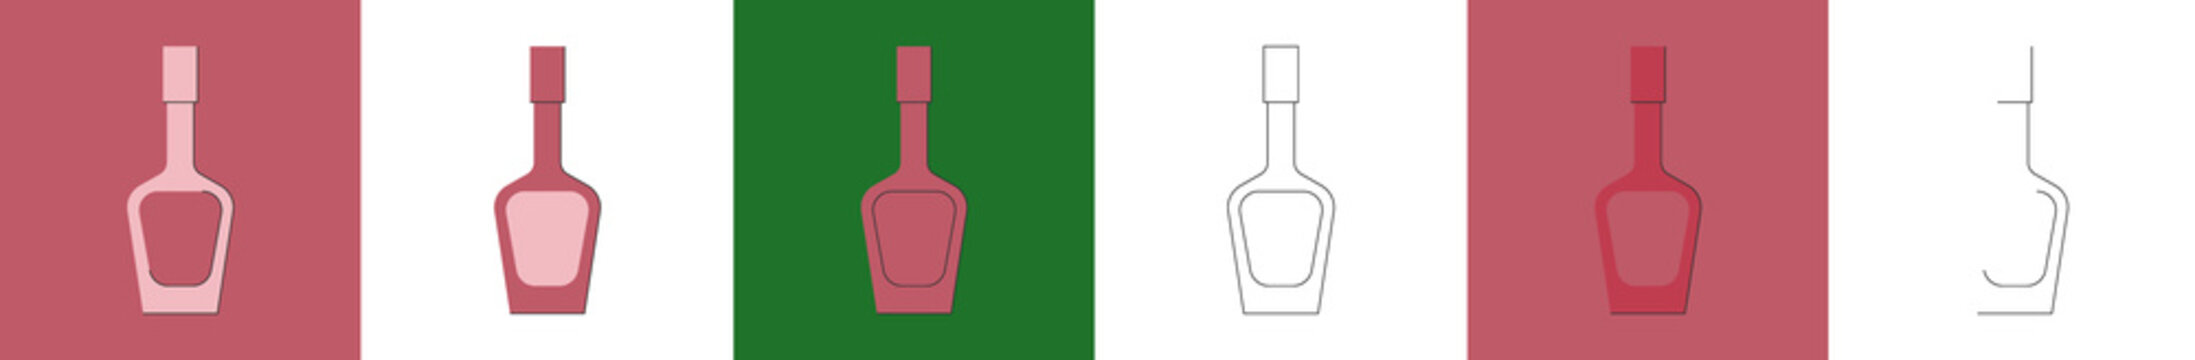 Bottle of liquor, great design for any purposes. Flat style. Party drink concept. Color icon bottle. Simple image shape with a thin line of shadow. Four types of object on different backdrop